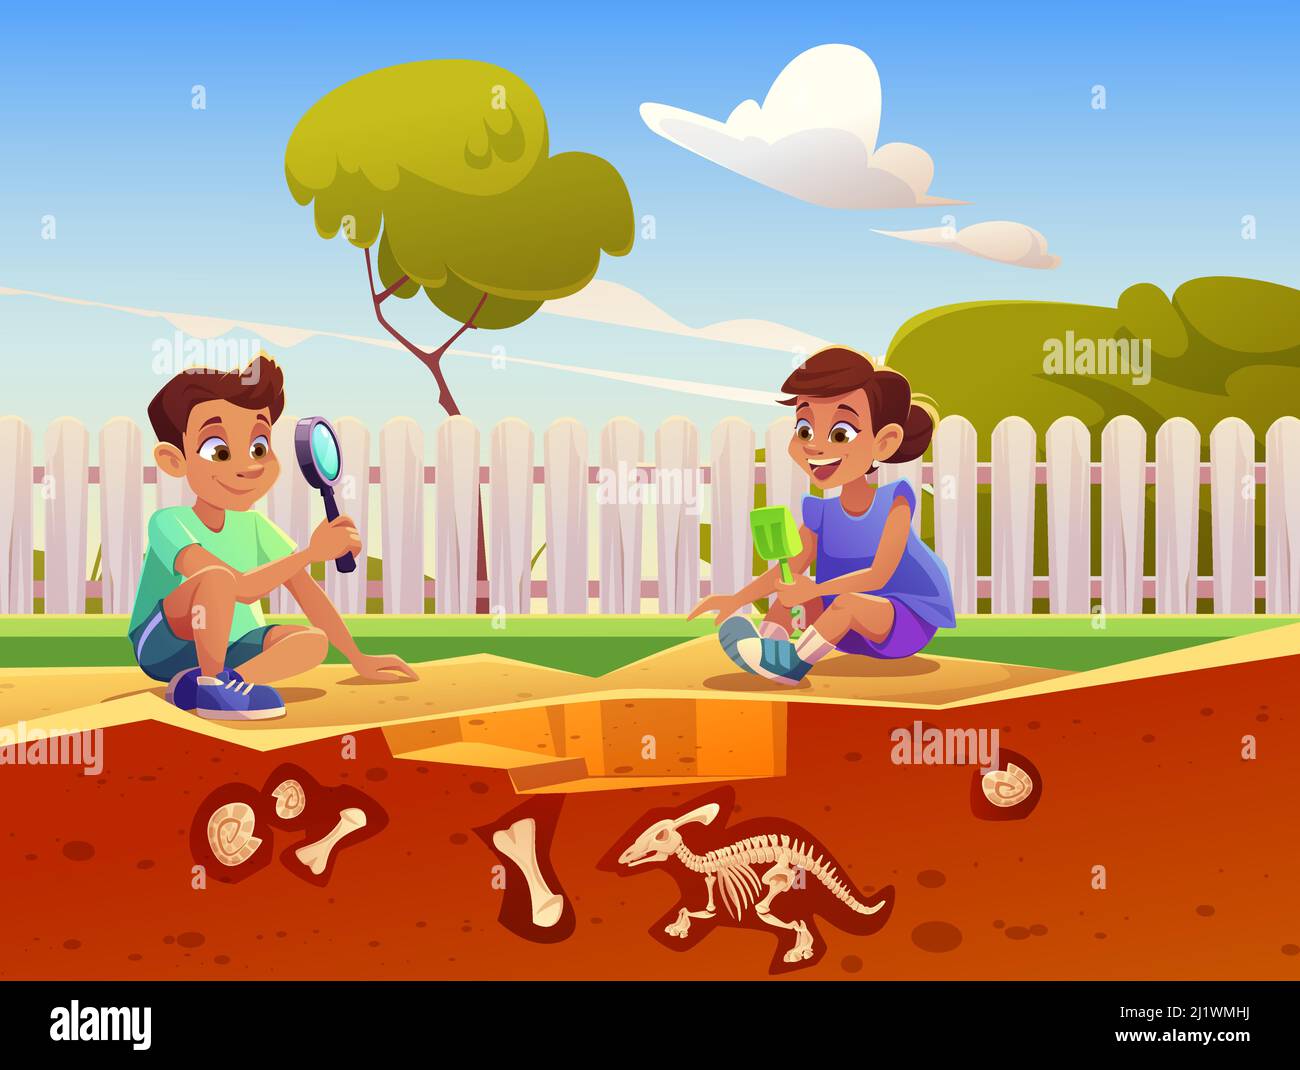 Boy and girl playing in game about excavation fossil dinosaurs in sandbox. Vector cartoon illustration with kids discover buried skeletons and shells Stock Vector